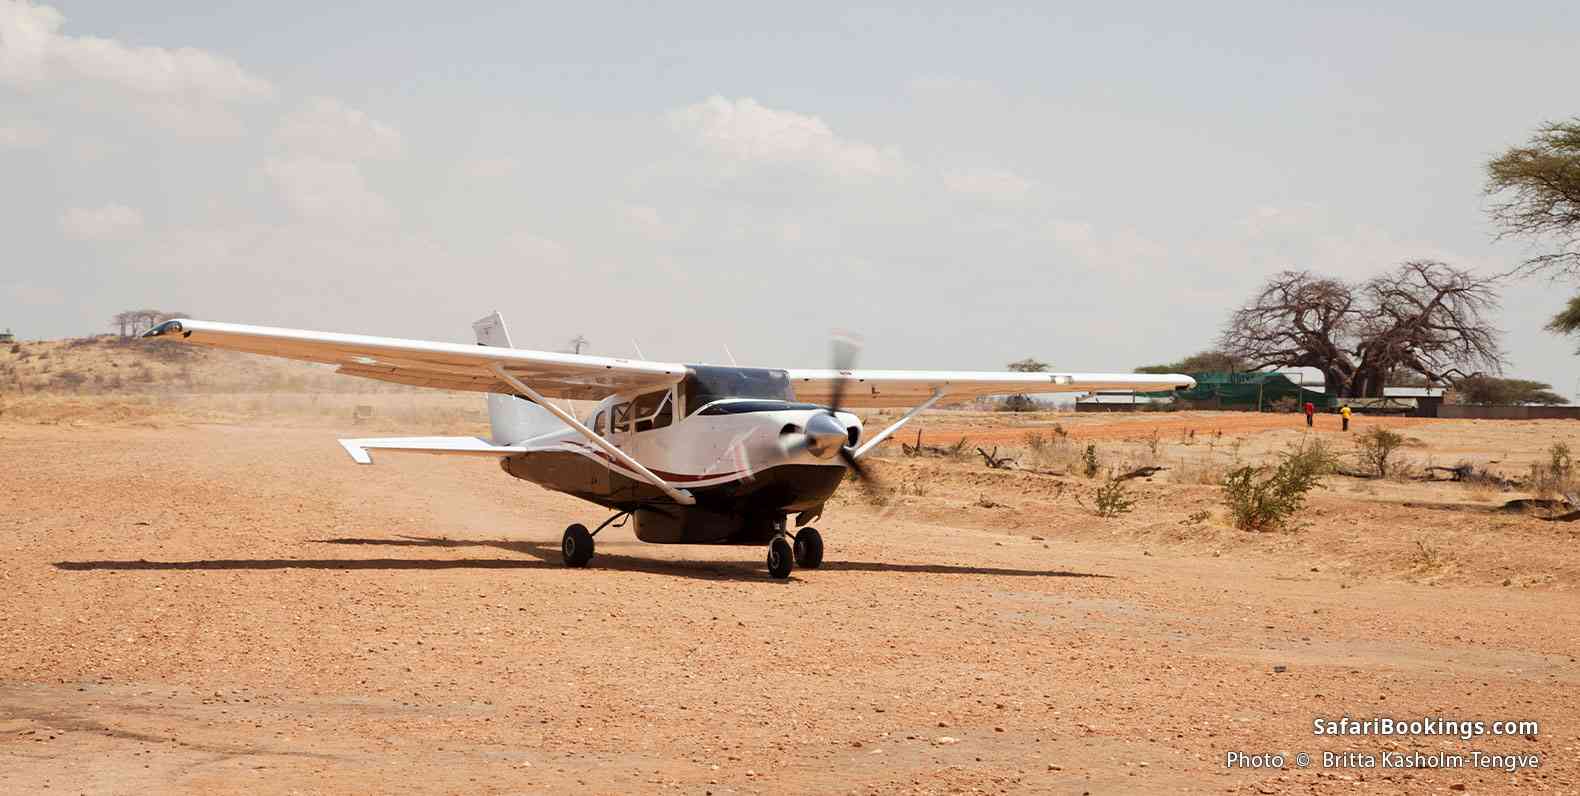 Small aircraft on the airstrip